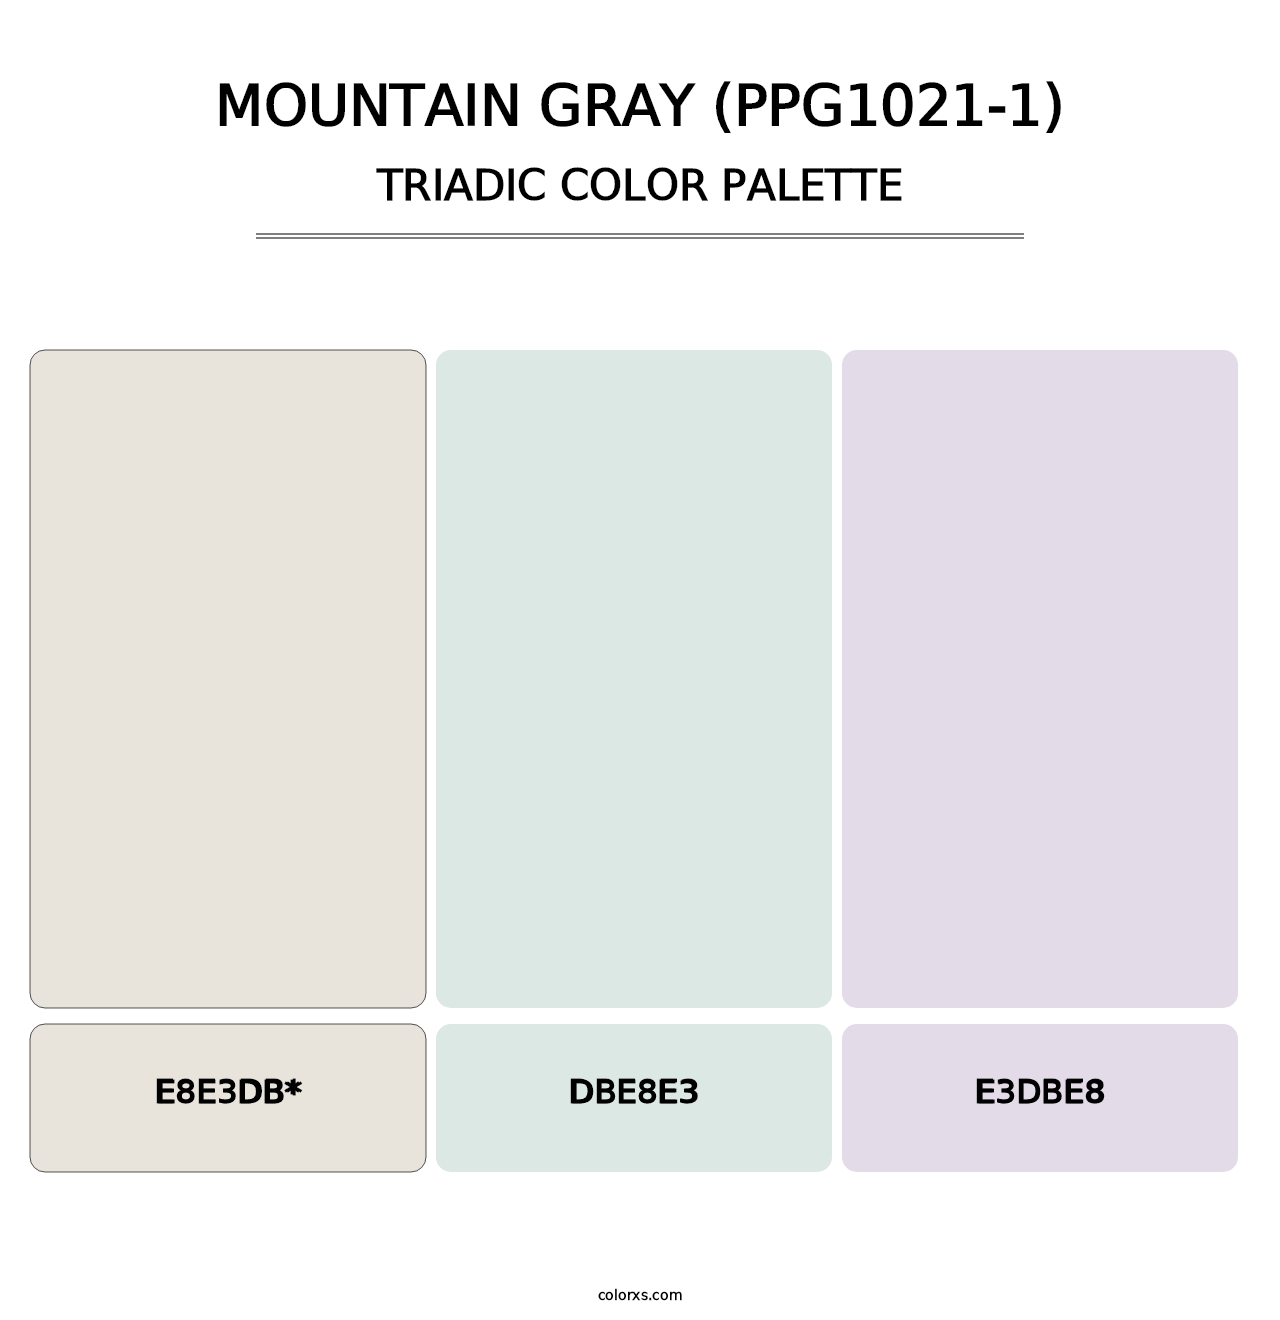 Mountain Gray (PPG1021-1) - Triadic Color Palette